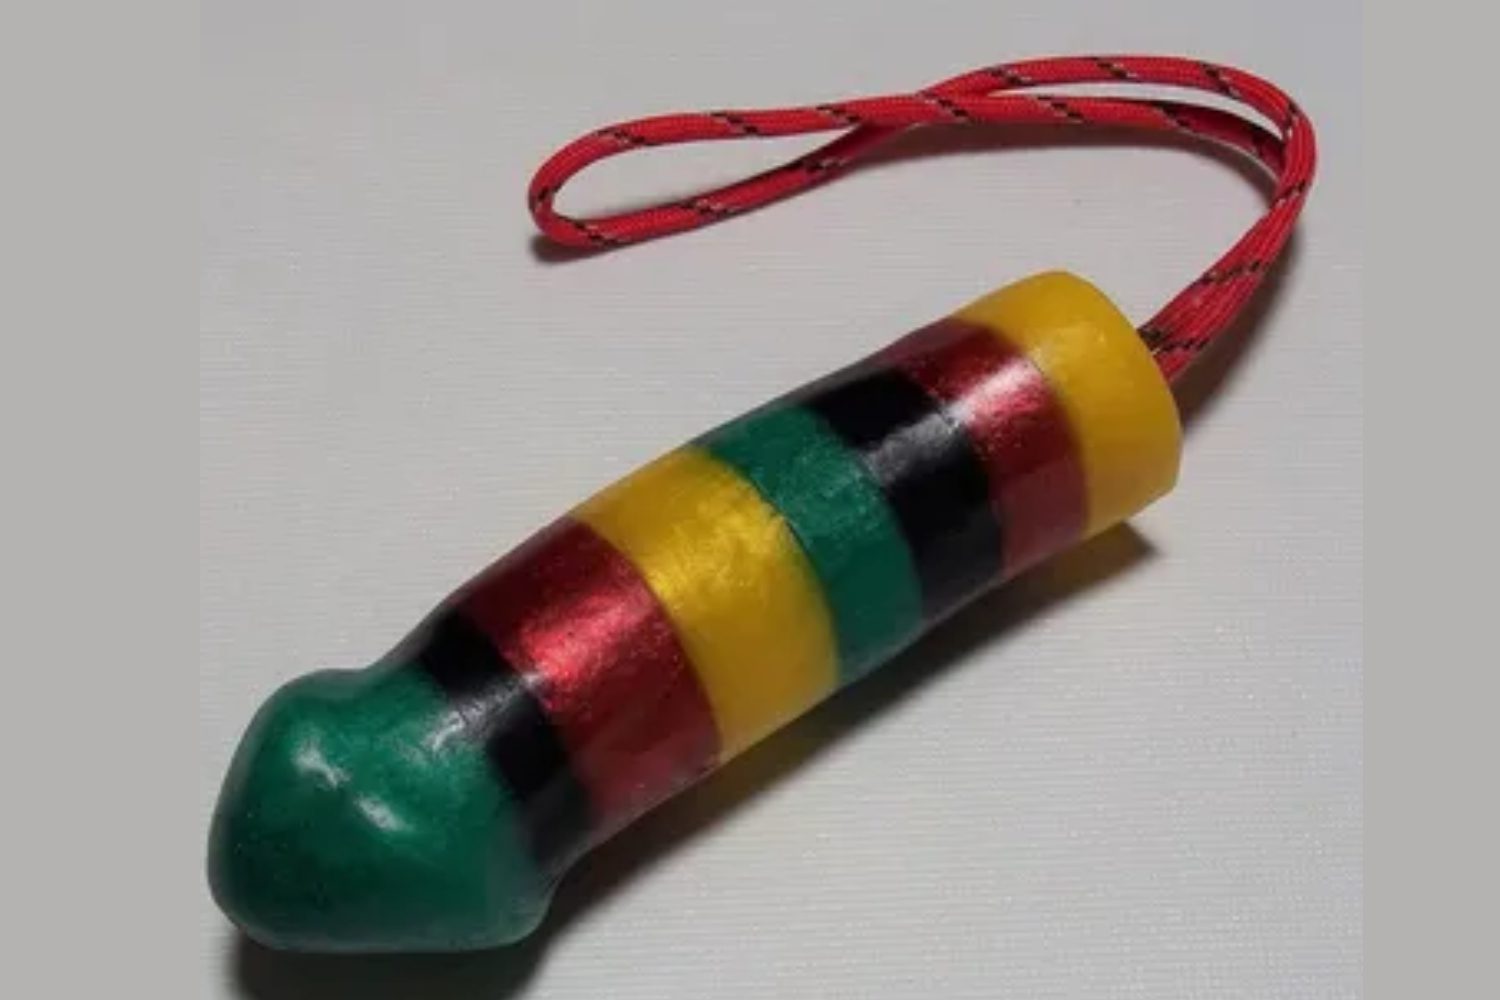 A wooden toy with red, yellow and green stripes.